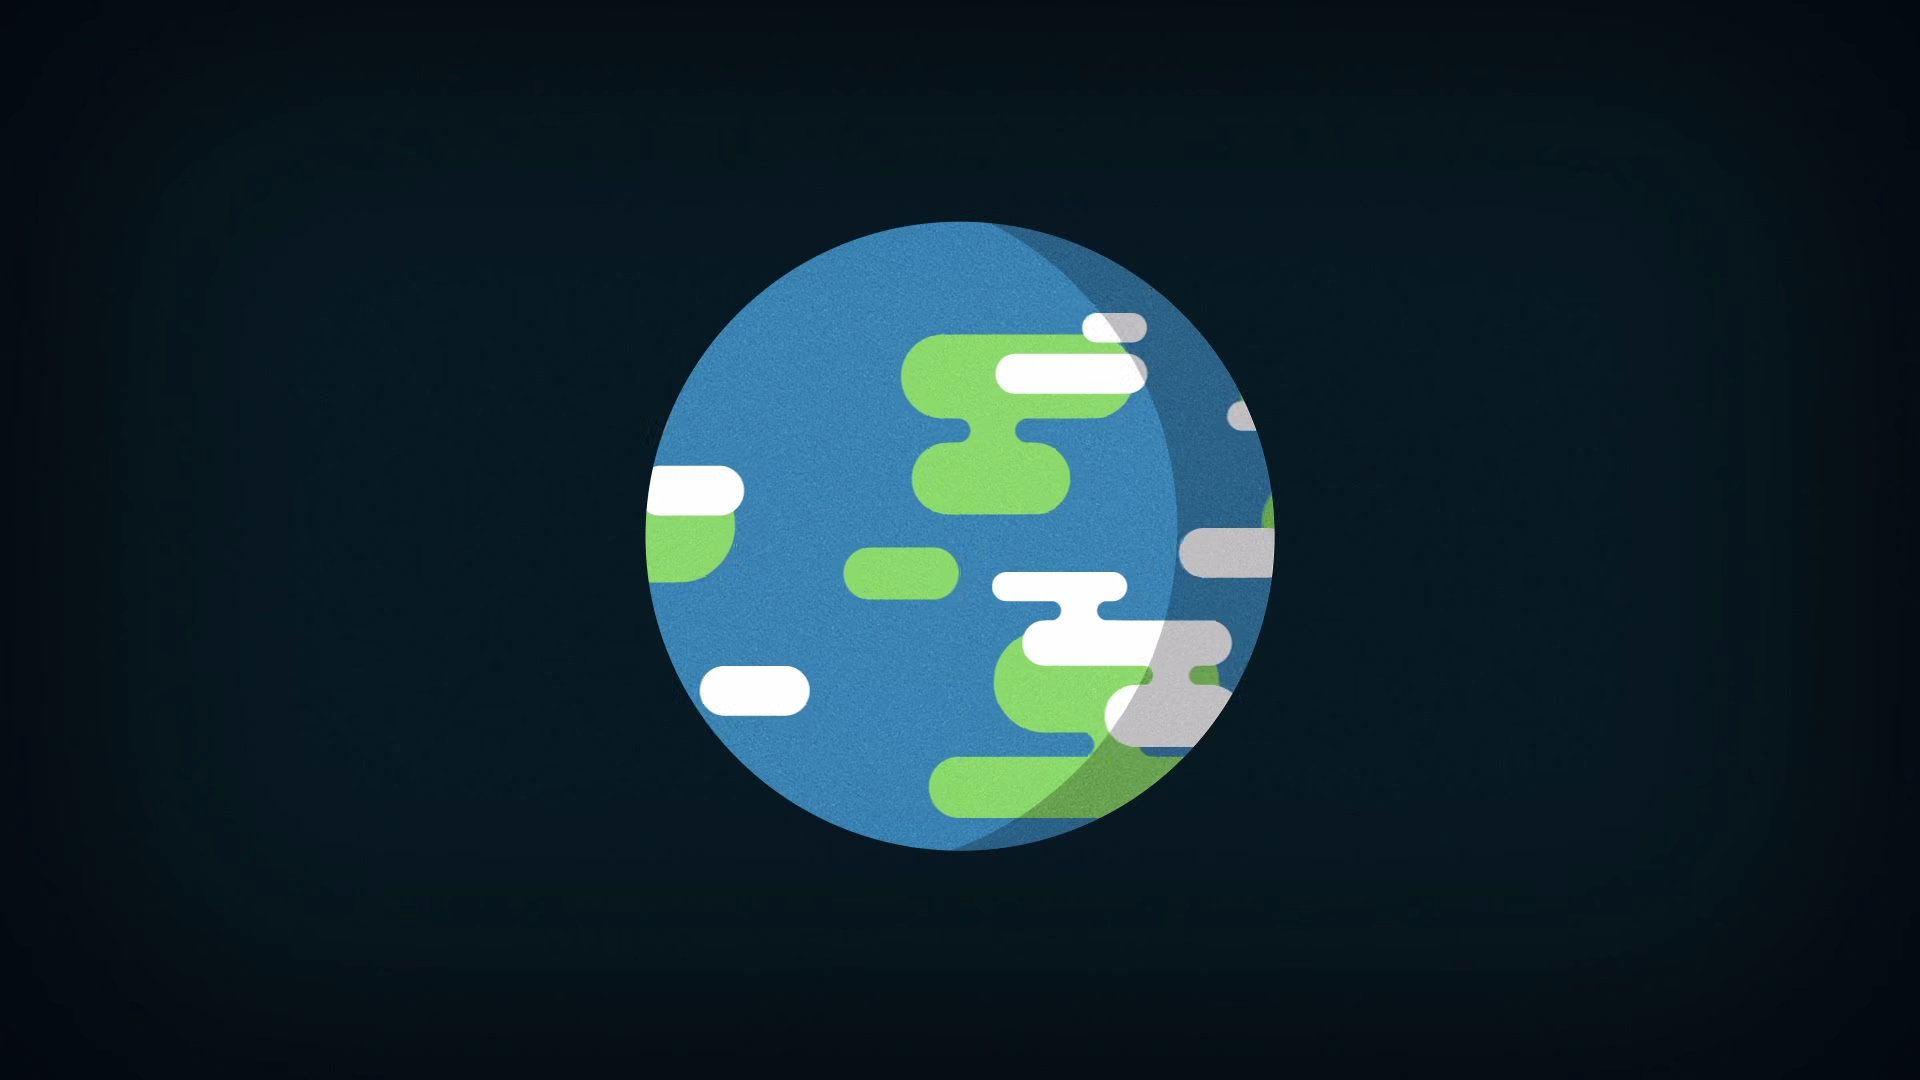 General 1920x1080 minimalism Earth space space art planet abstract artwork simple background Kurzgesagt – In a Nutshell